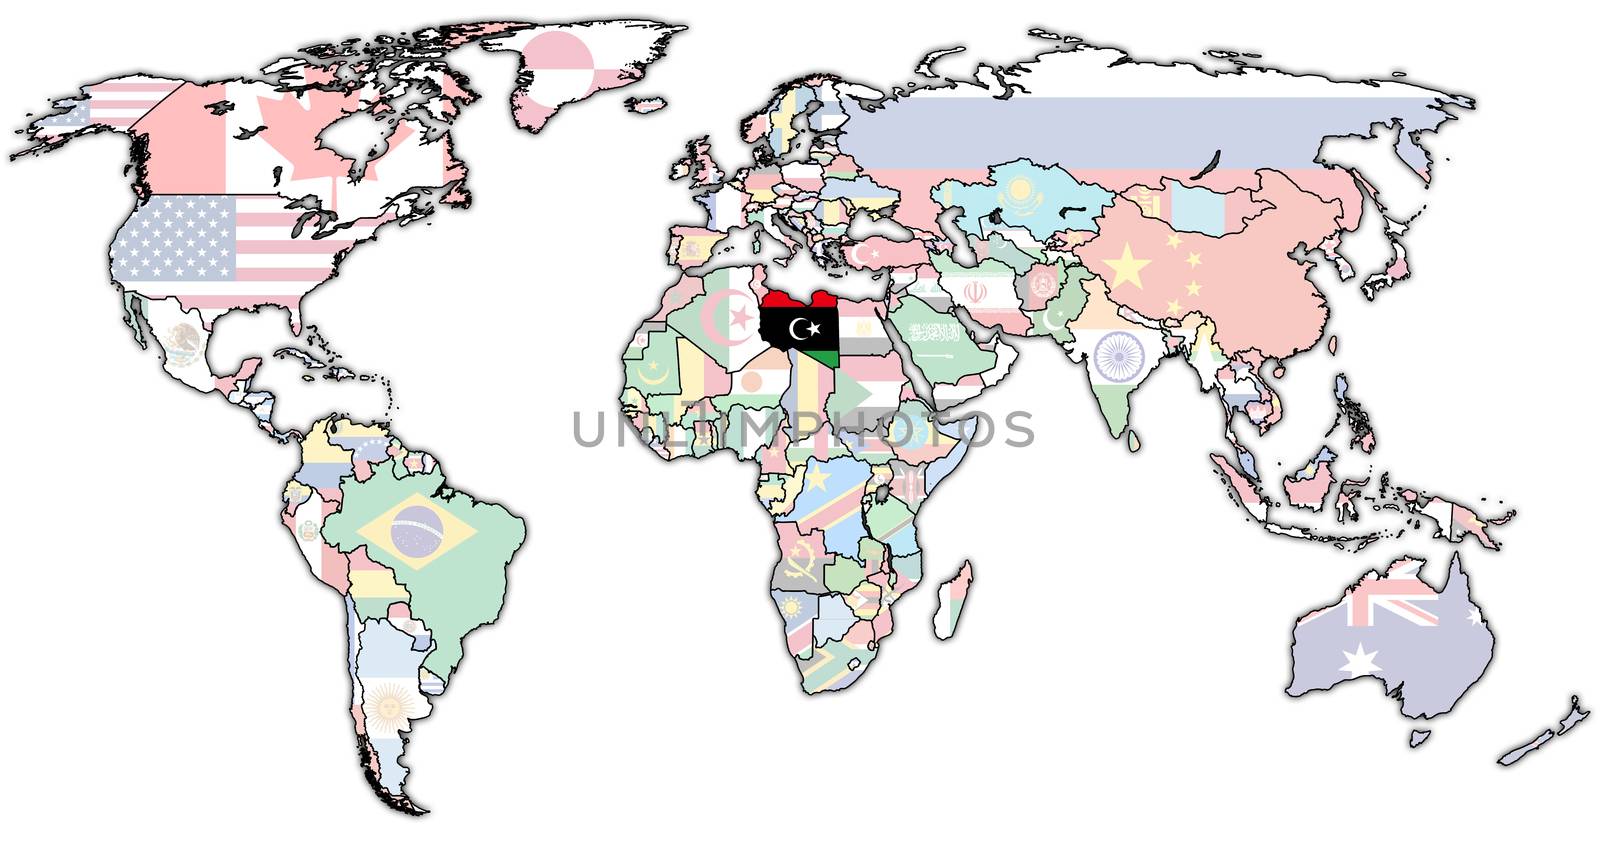 libya territory on world map by michal812